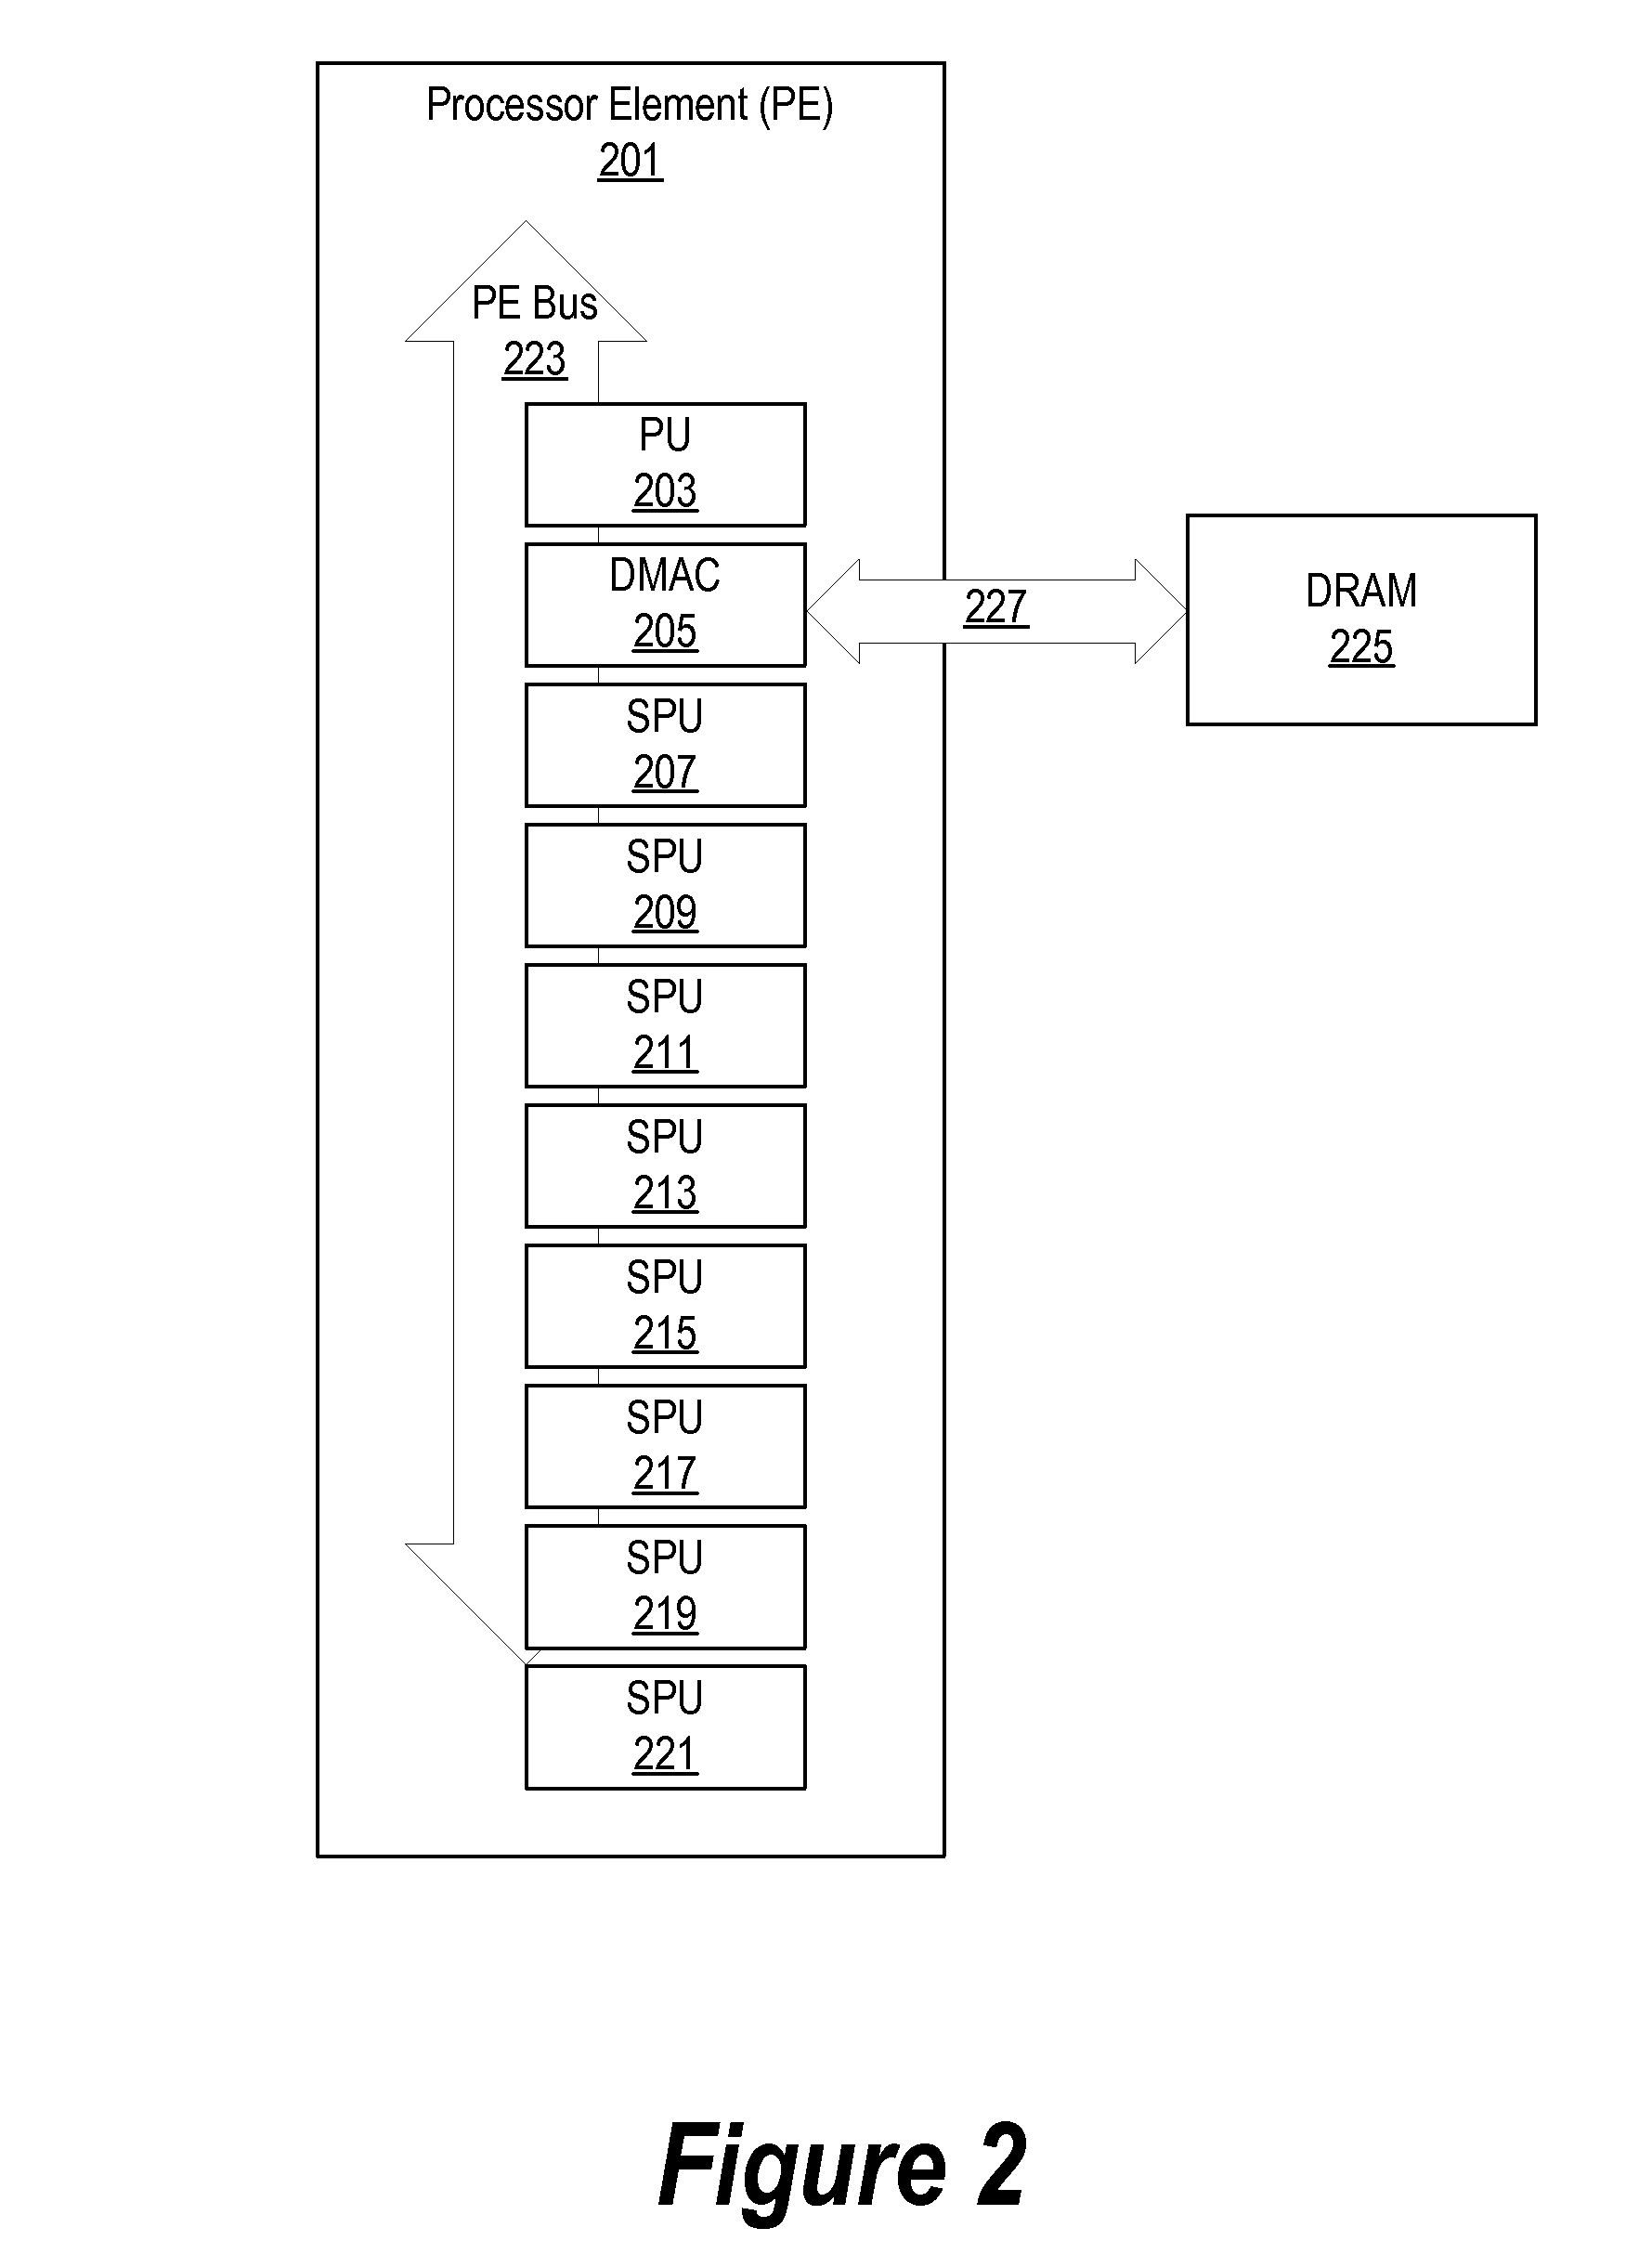 Task Queue Management of Virtual Devices Using a Plurality of Processors